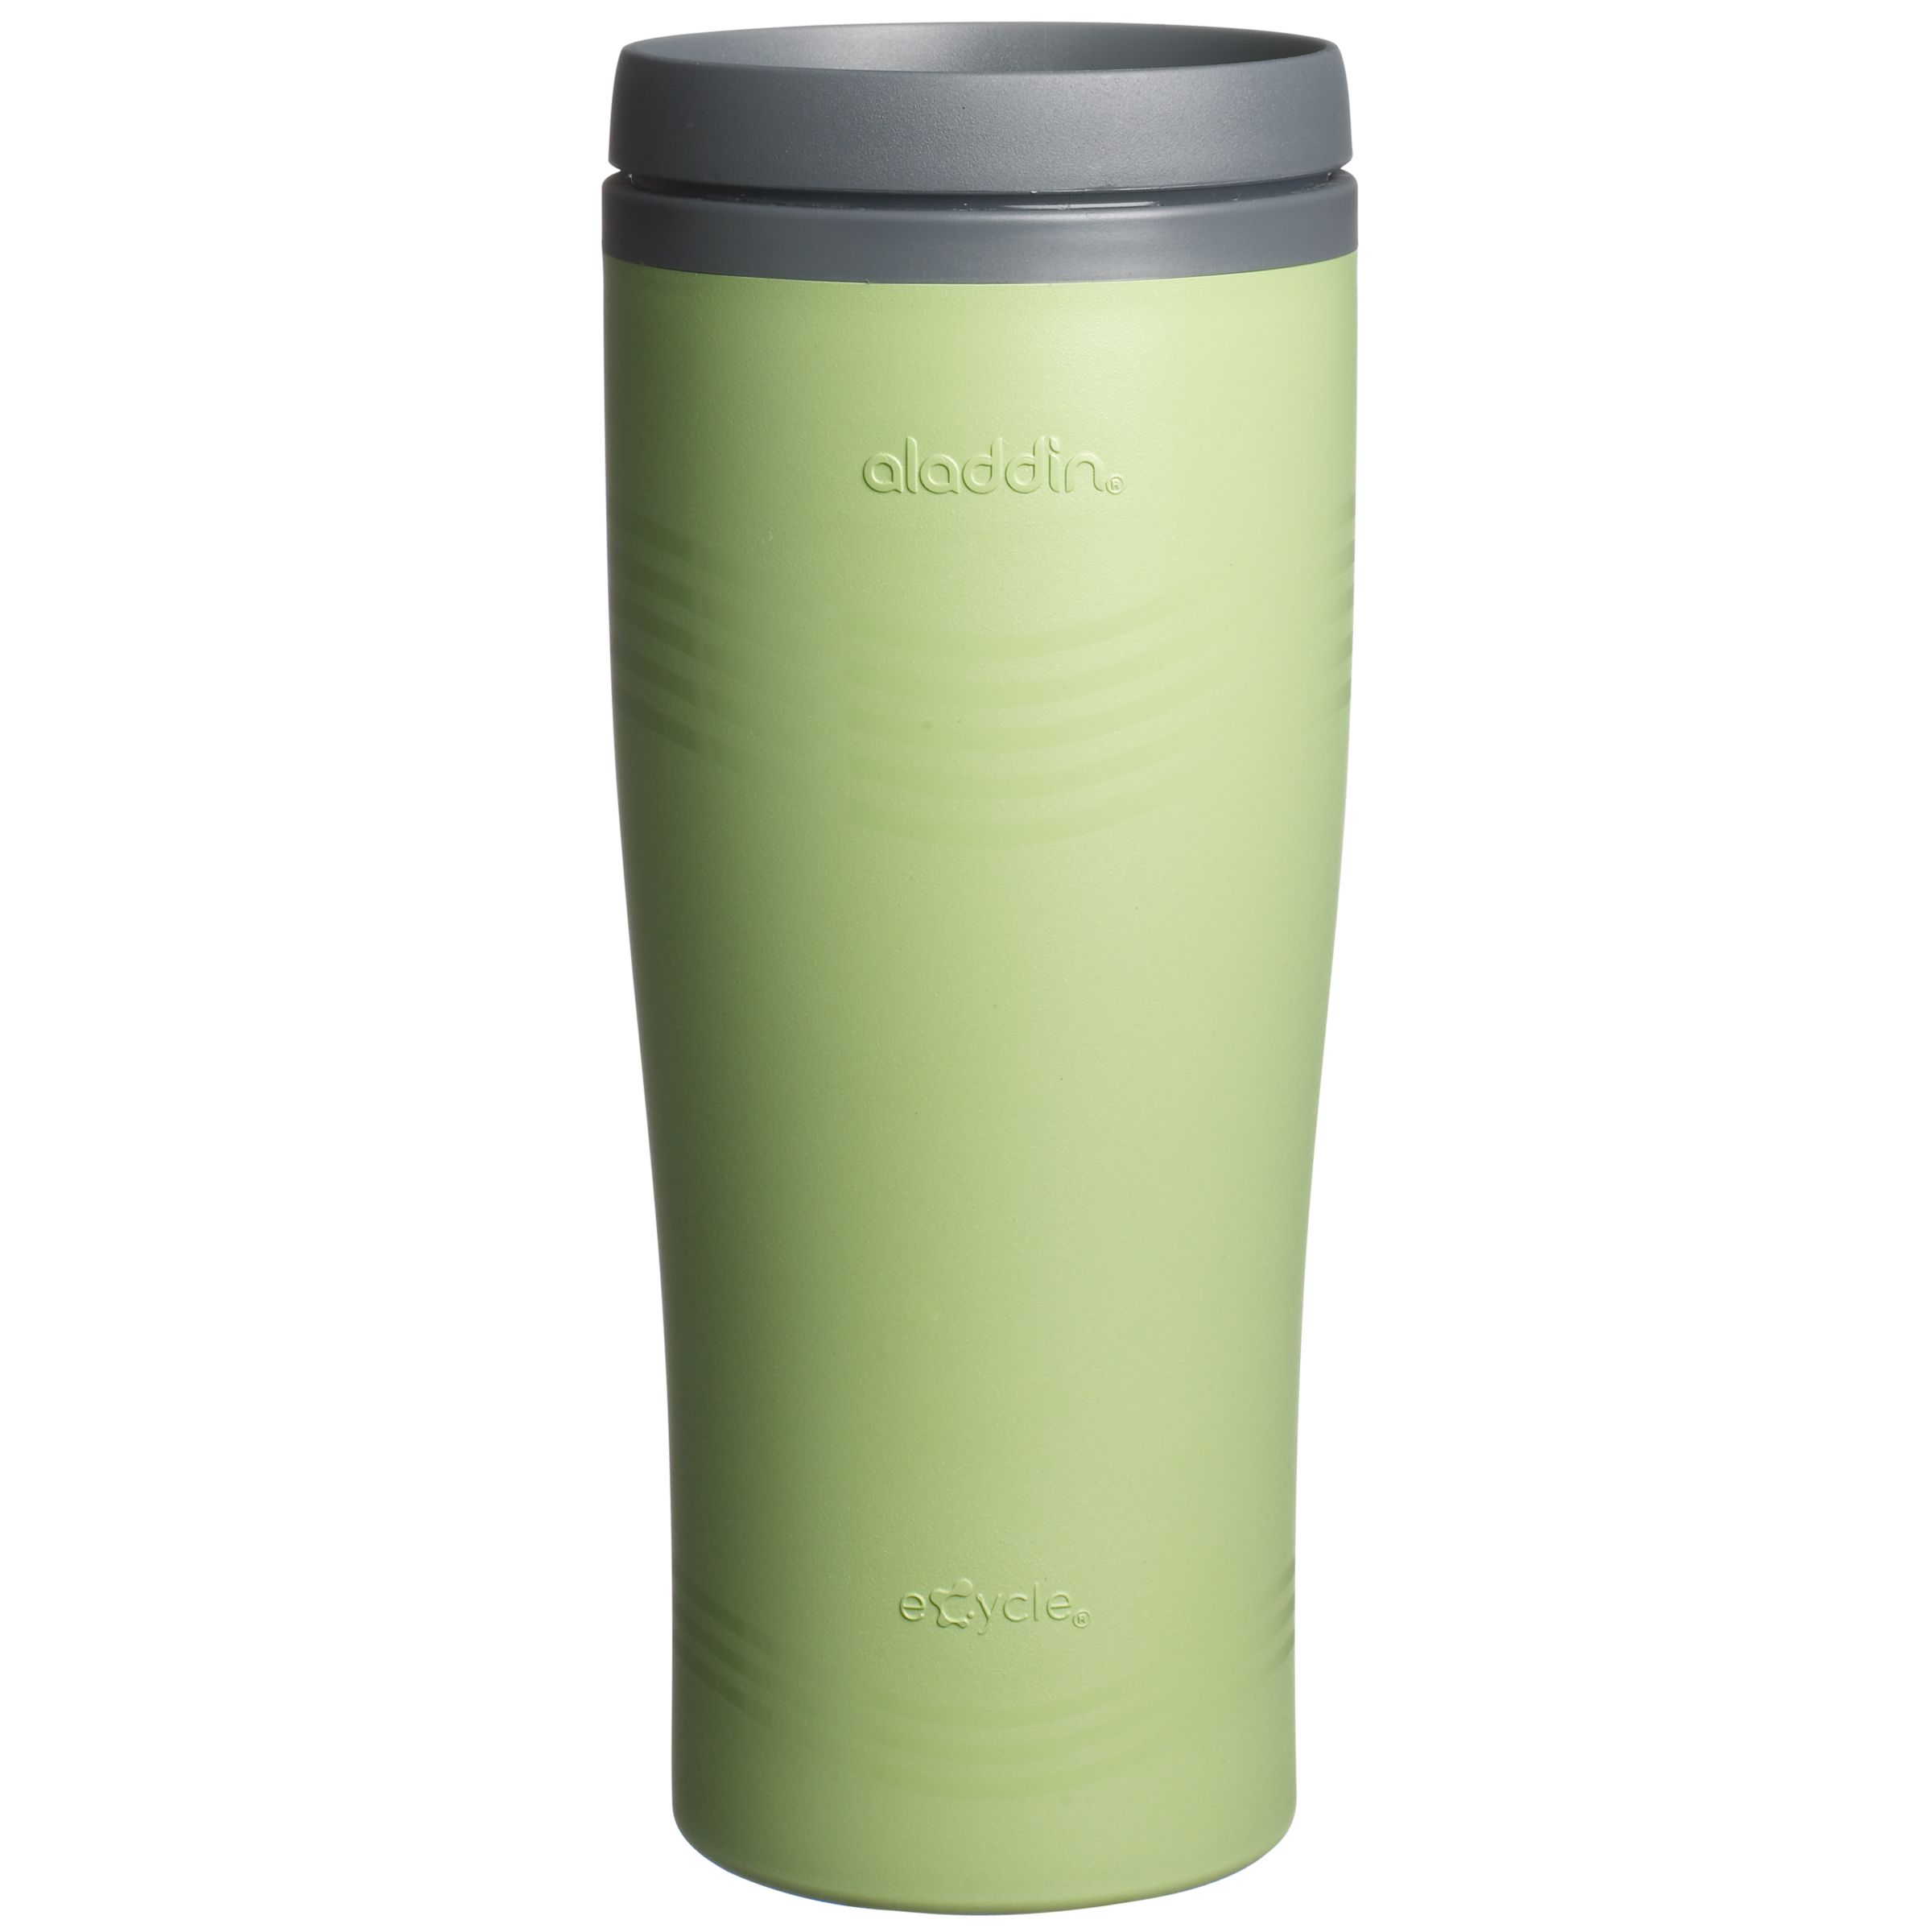 Stanley Aladdin Recycled Tumbler, Green, 0.3L